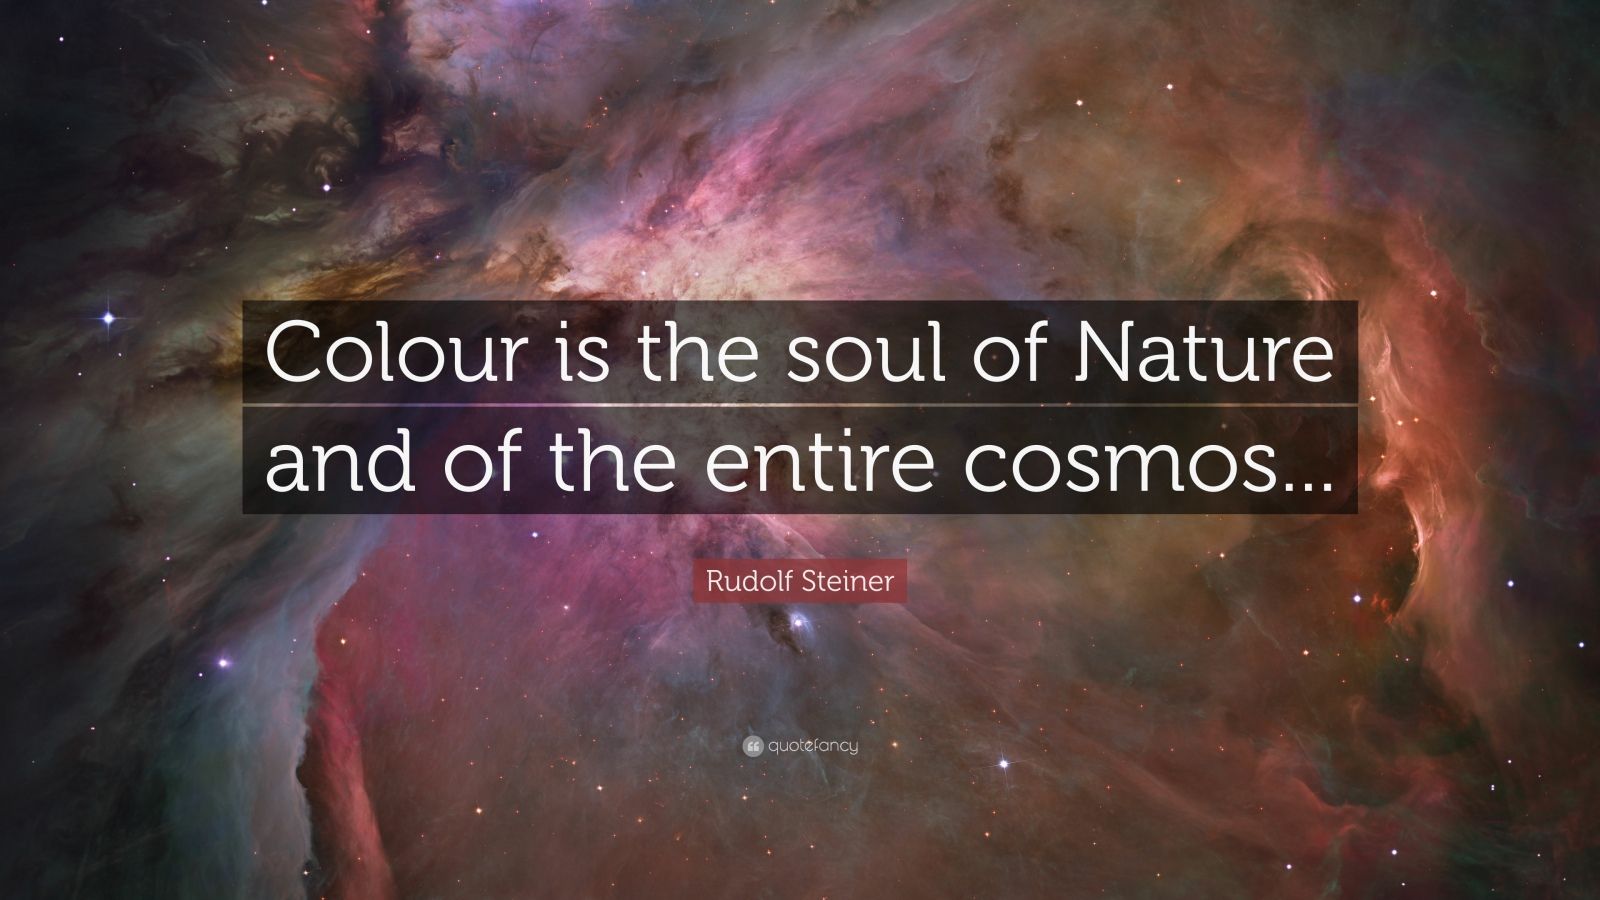 Rudolf Steiner Quote “Colour is the soul of Nature and of the entire